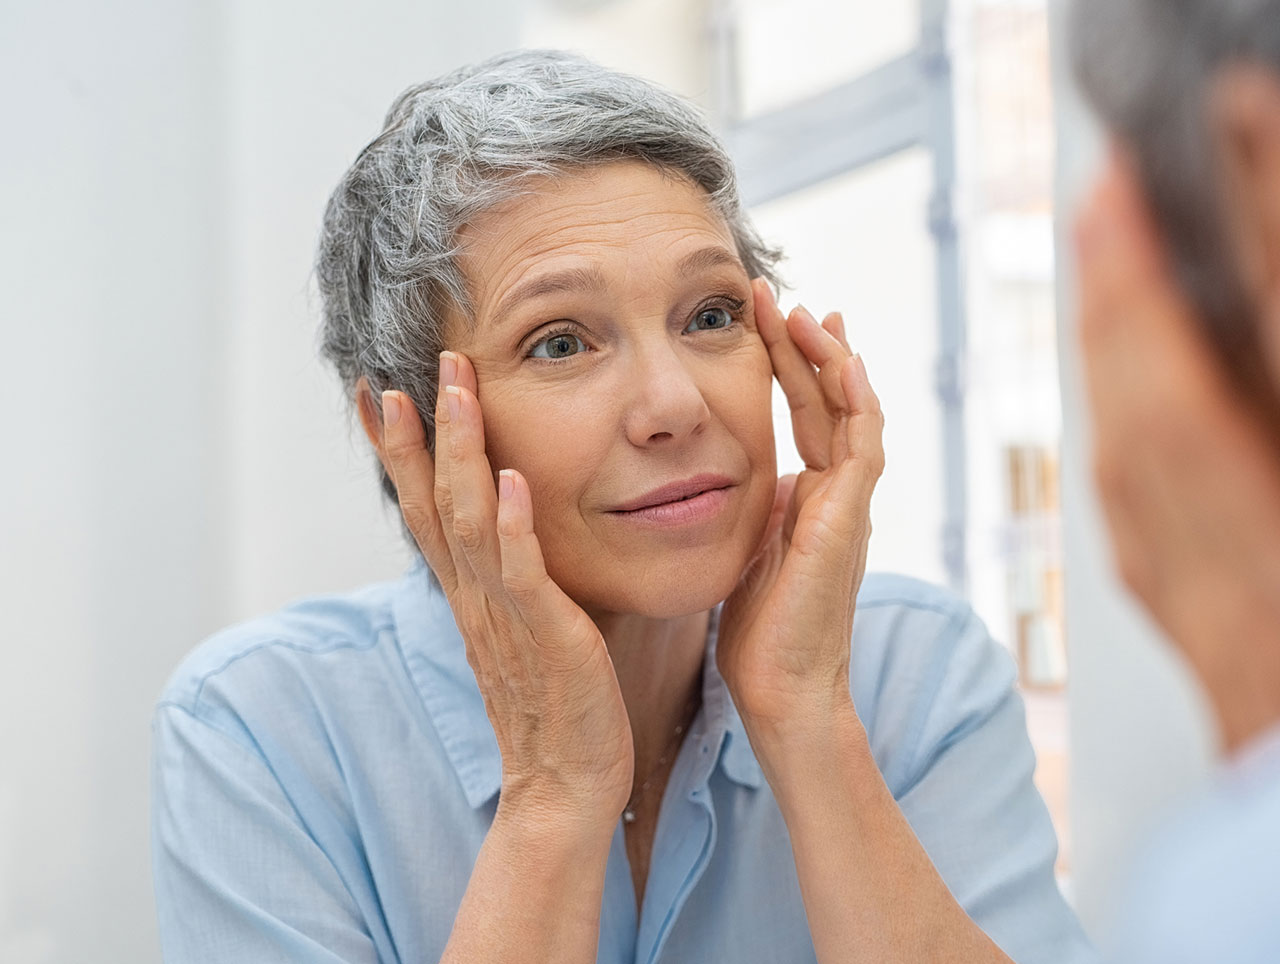 Older woman looking in the mirror examining her upper face area around her eyes and considering blepharoplasty.